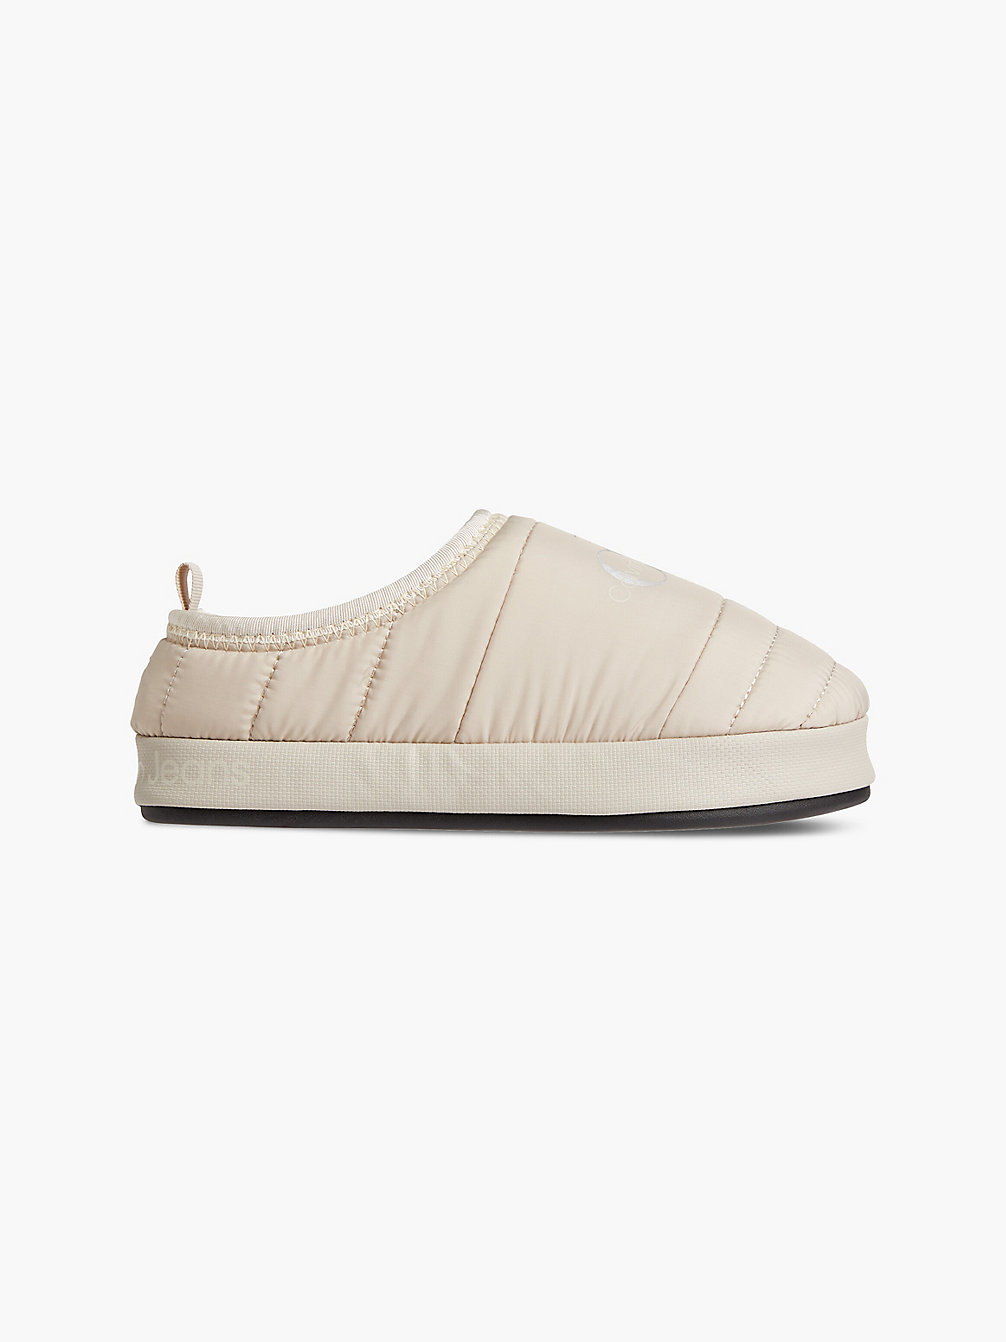 EGGSHELL Recycled Quilted Slippers undefined women Calvin Klein